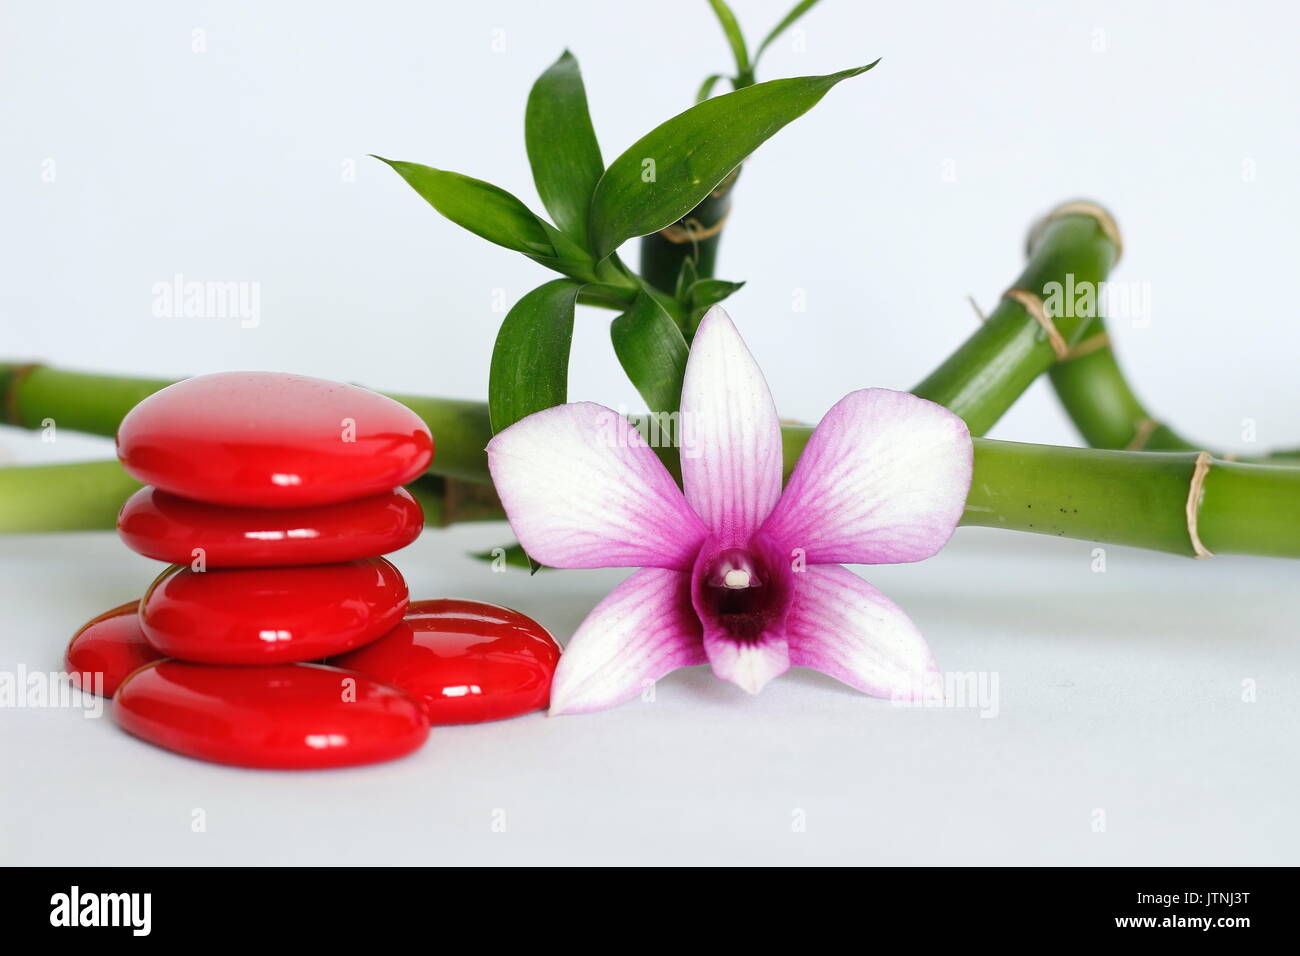 Red pebbles arranged in Zen lifestyle with a two-tone orchid on the right side of the twisted bamboo set behind the whole on a white background Stock Photo